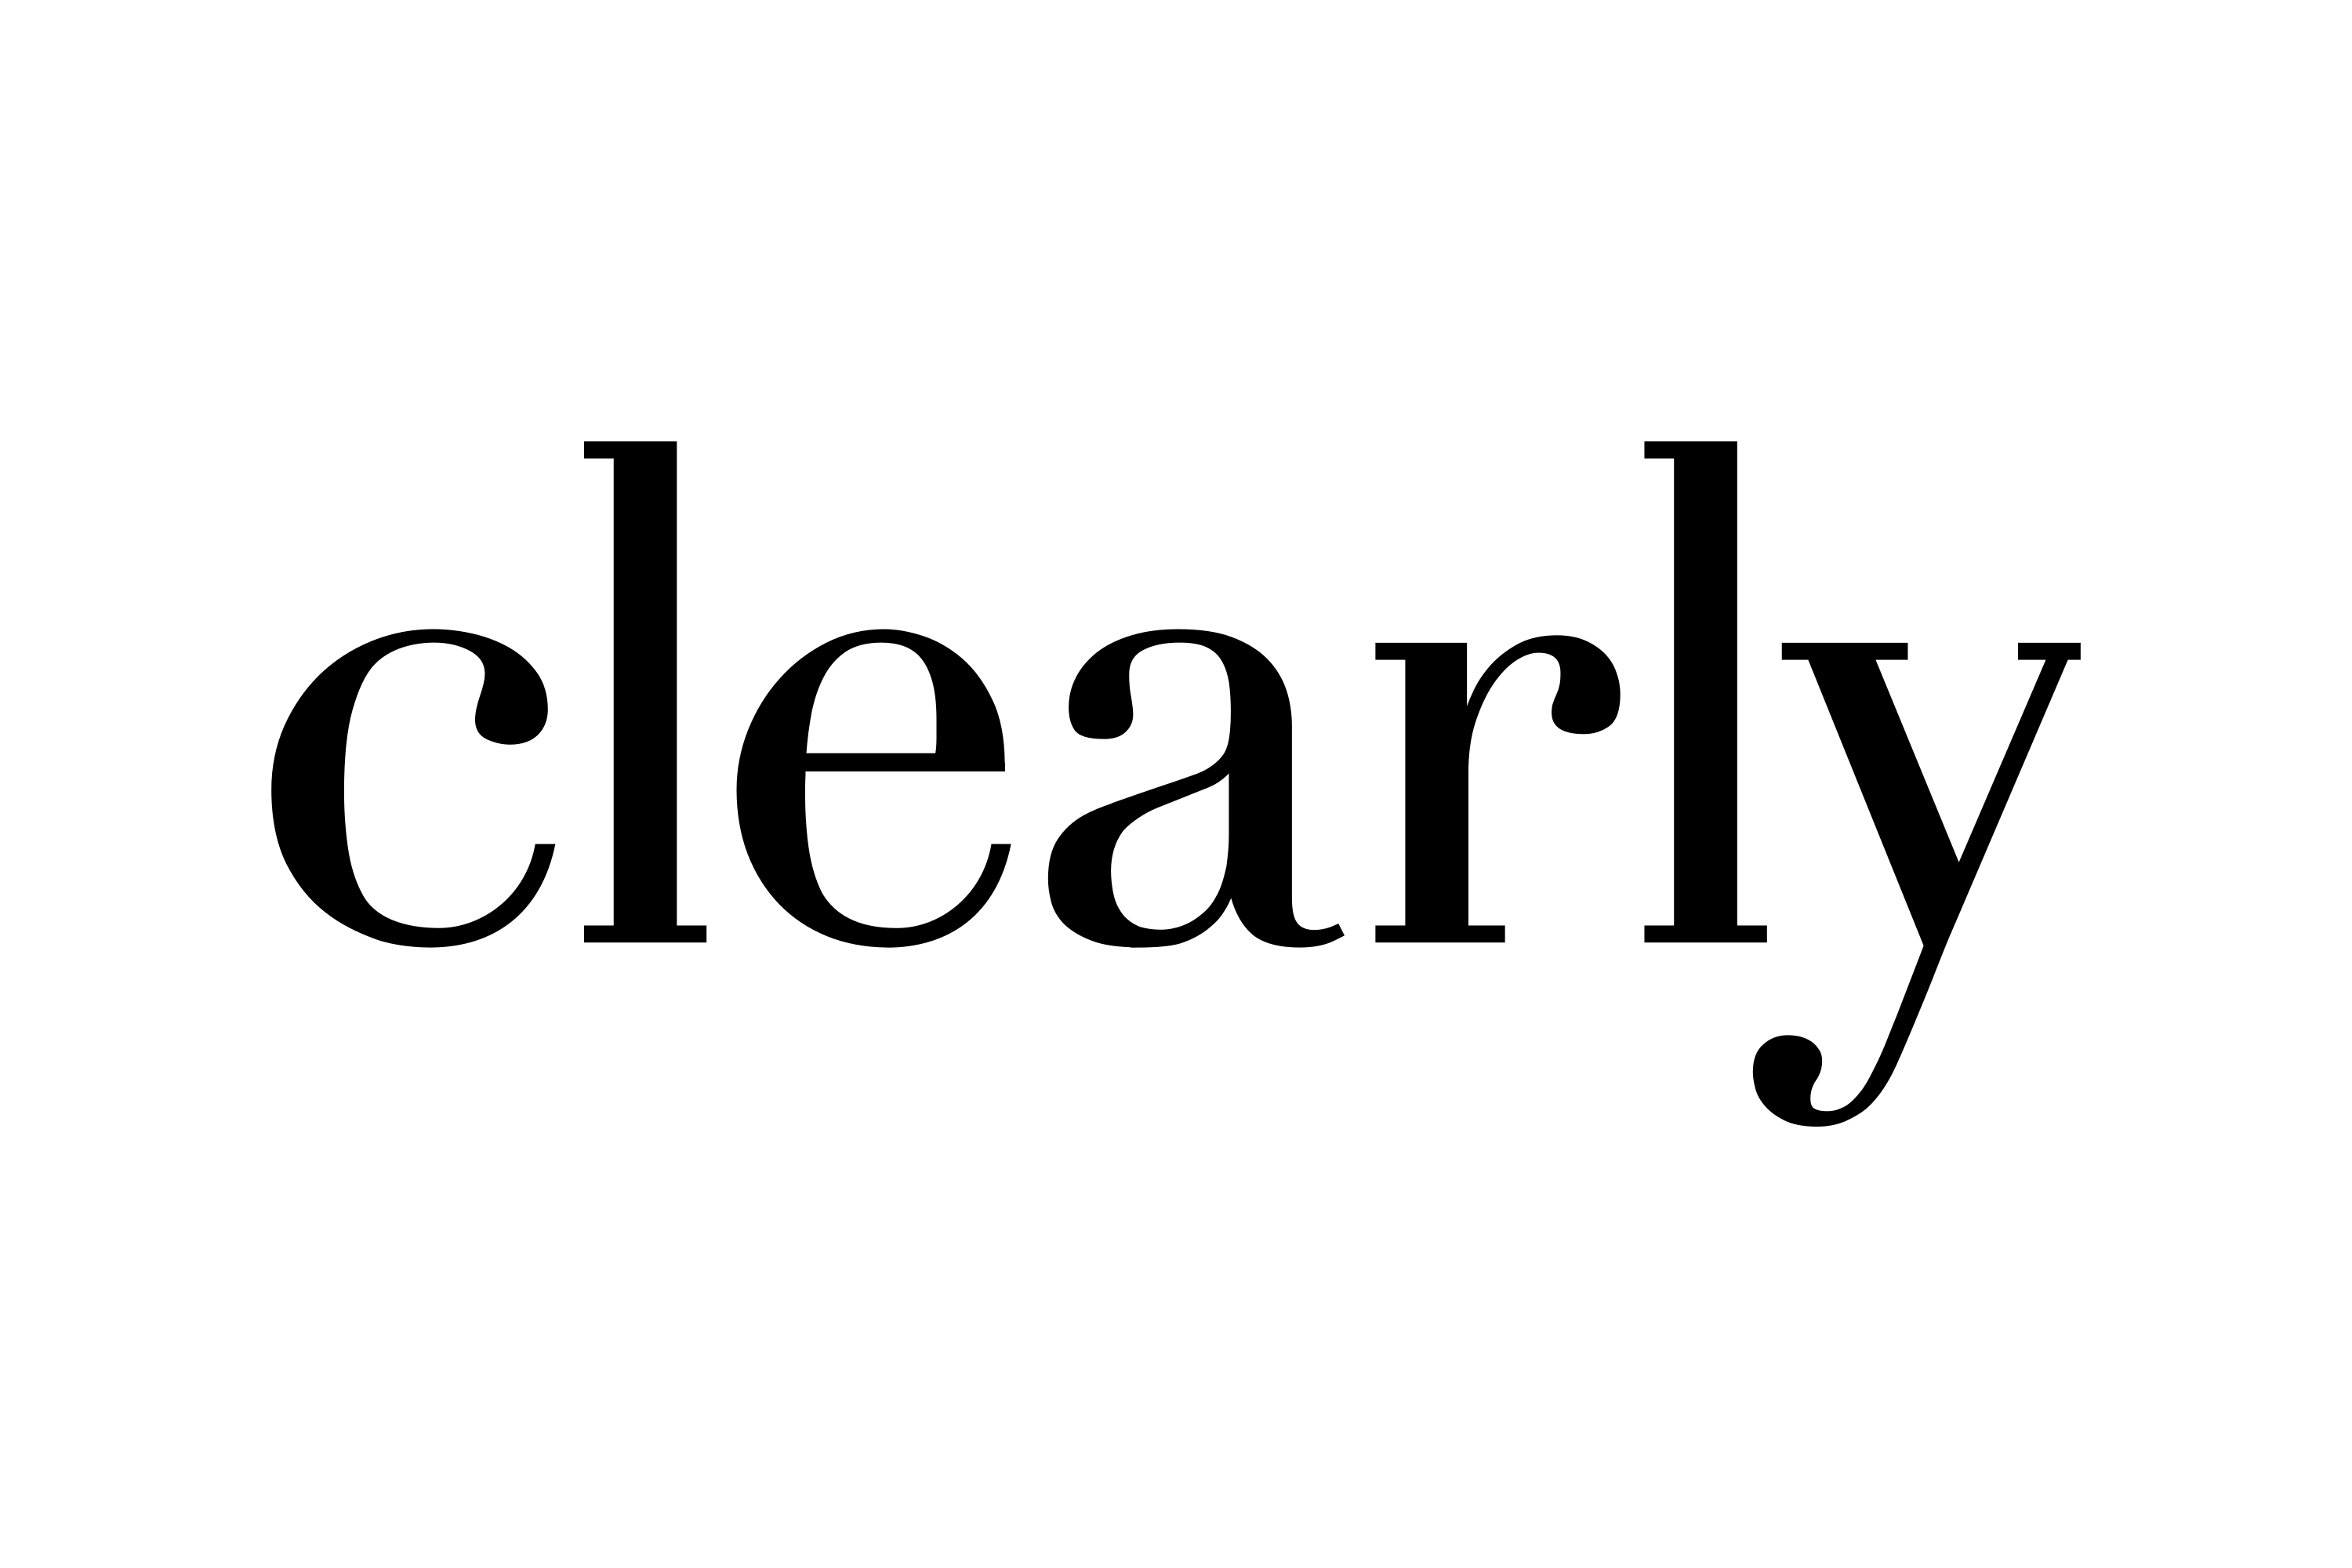 Download clearly.ca Logo in SVG Vector or PNG File Format - Logo.wine